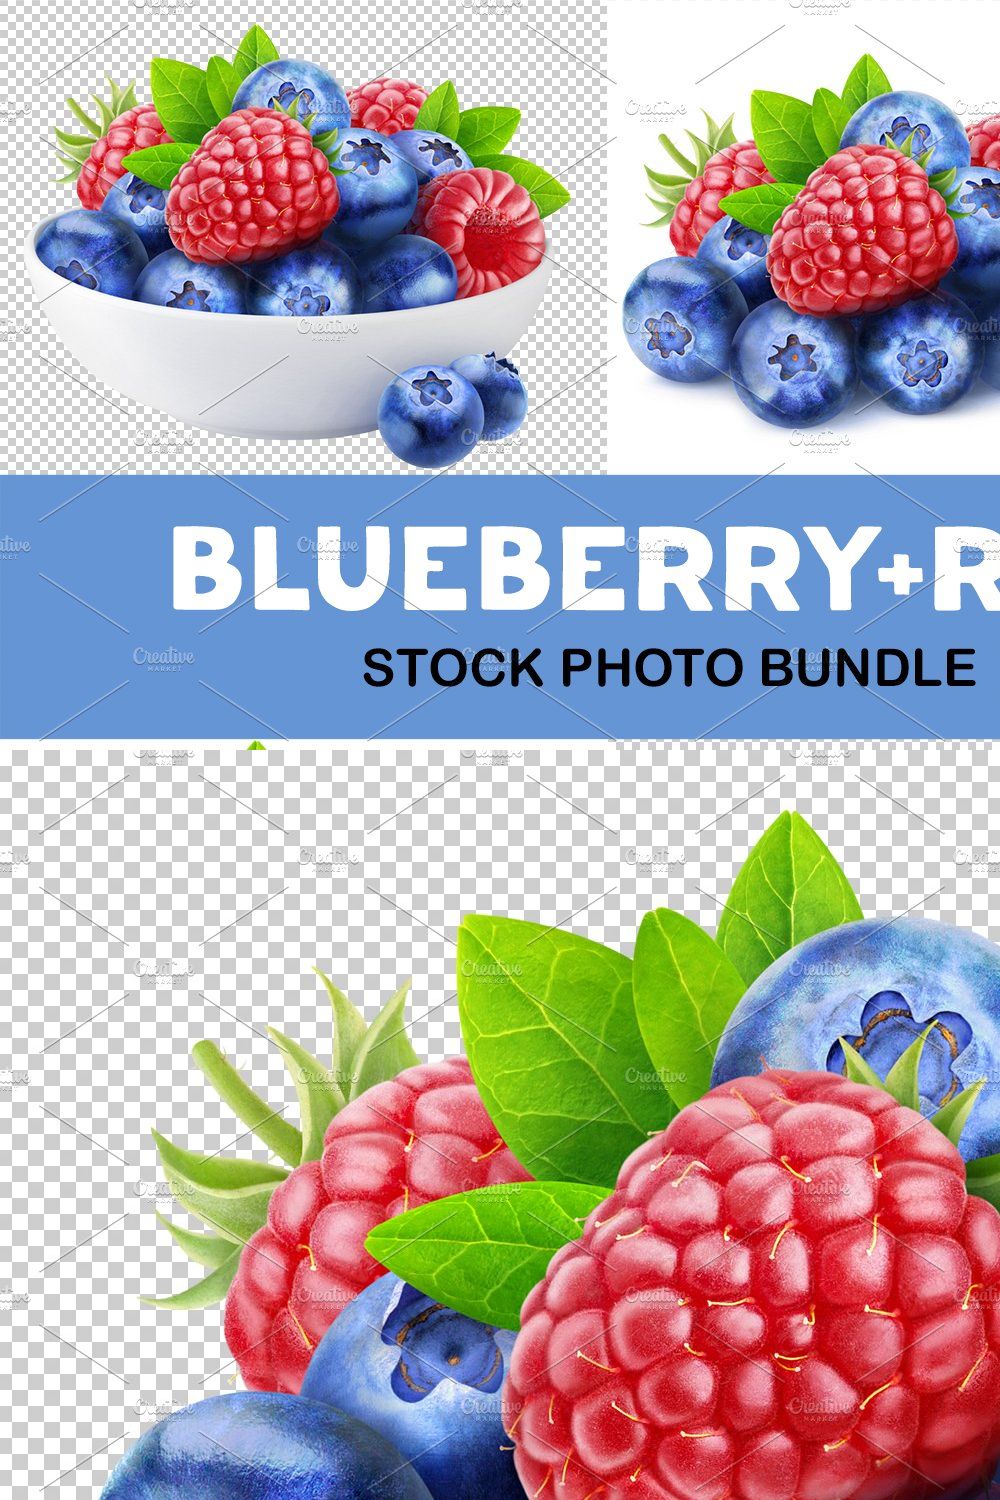 Blueberry and raspberry pinterest preview image.